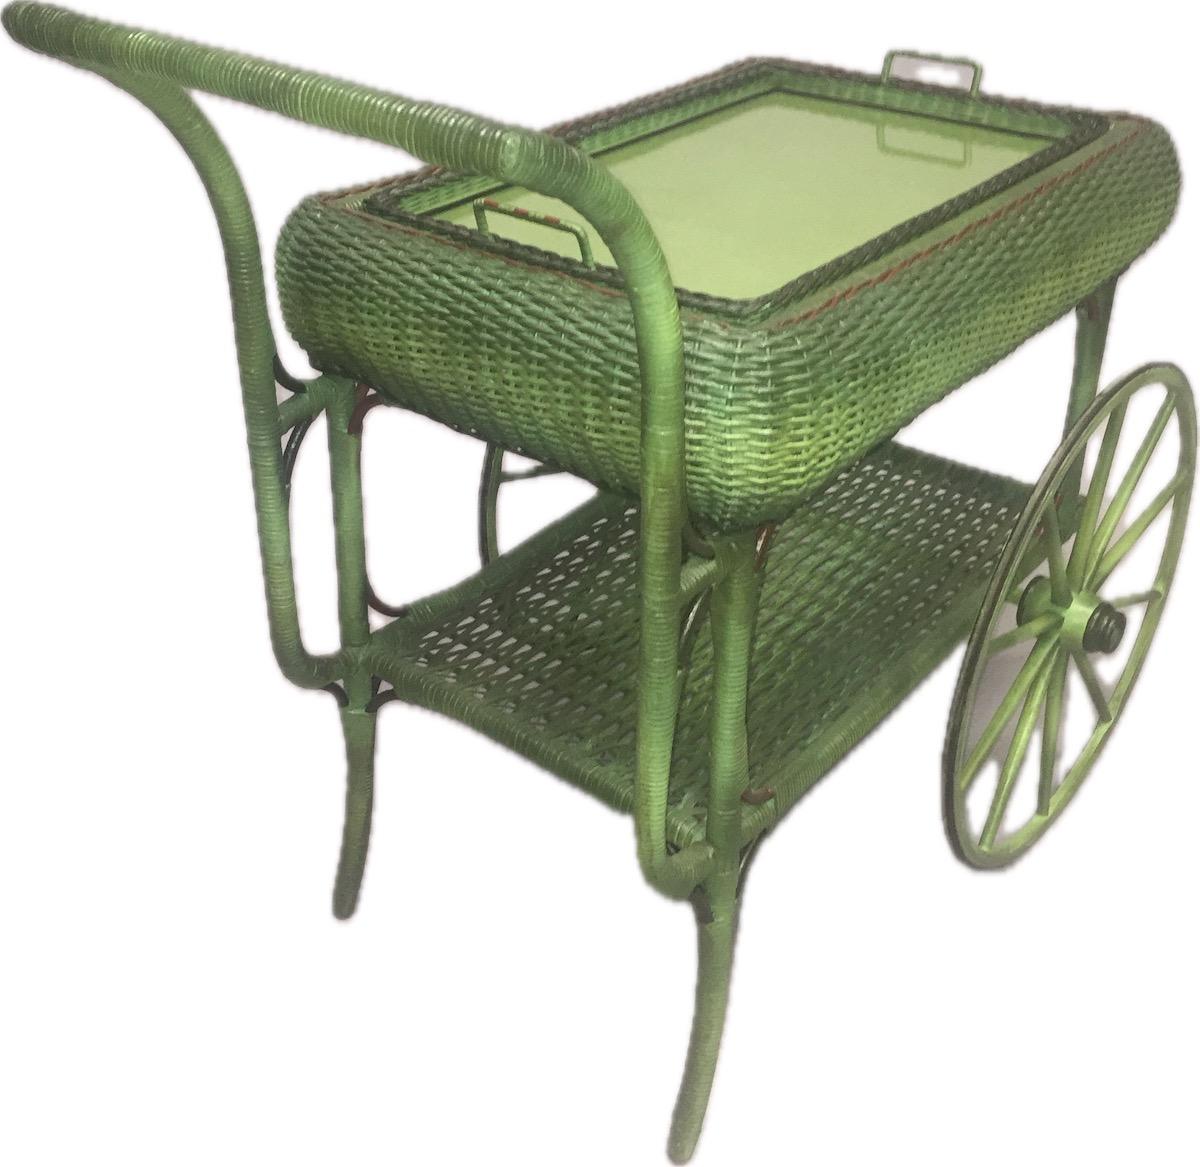 A rare rolled skirted serving cart in French green finish with red and black accented trim, American, Heywood Wakefield Company,Gardner,Ma.This piece is elegantly designed with large oversized rubberized wheels, a convenient large woven bottom